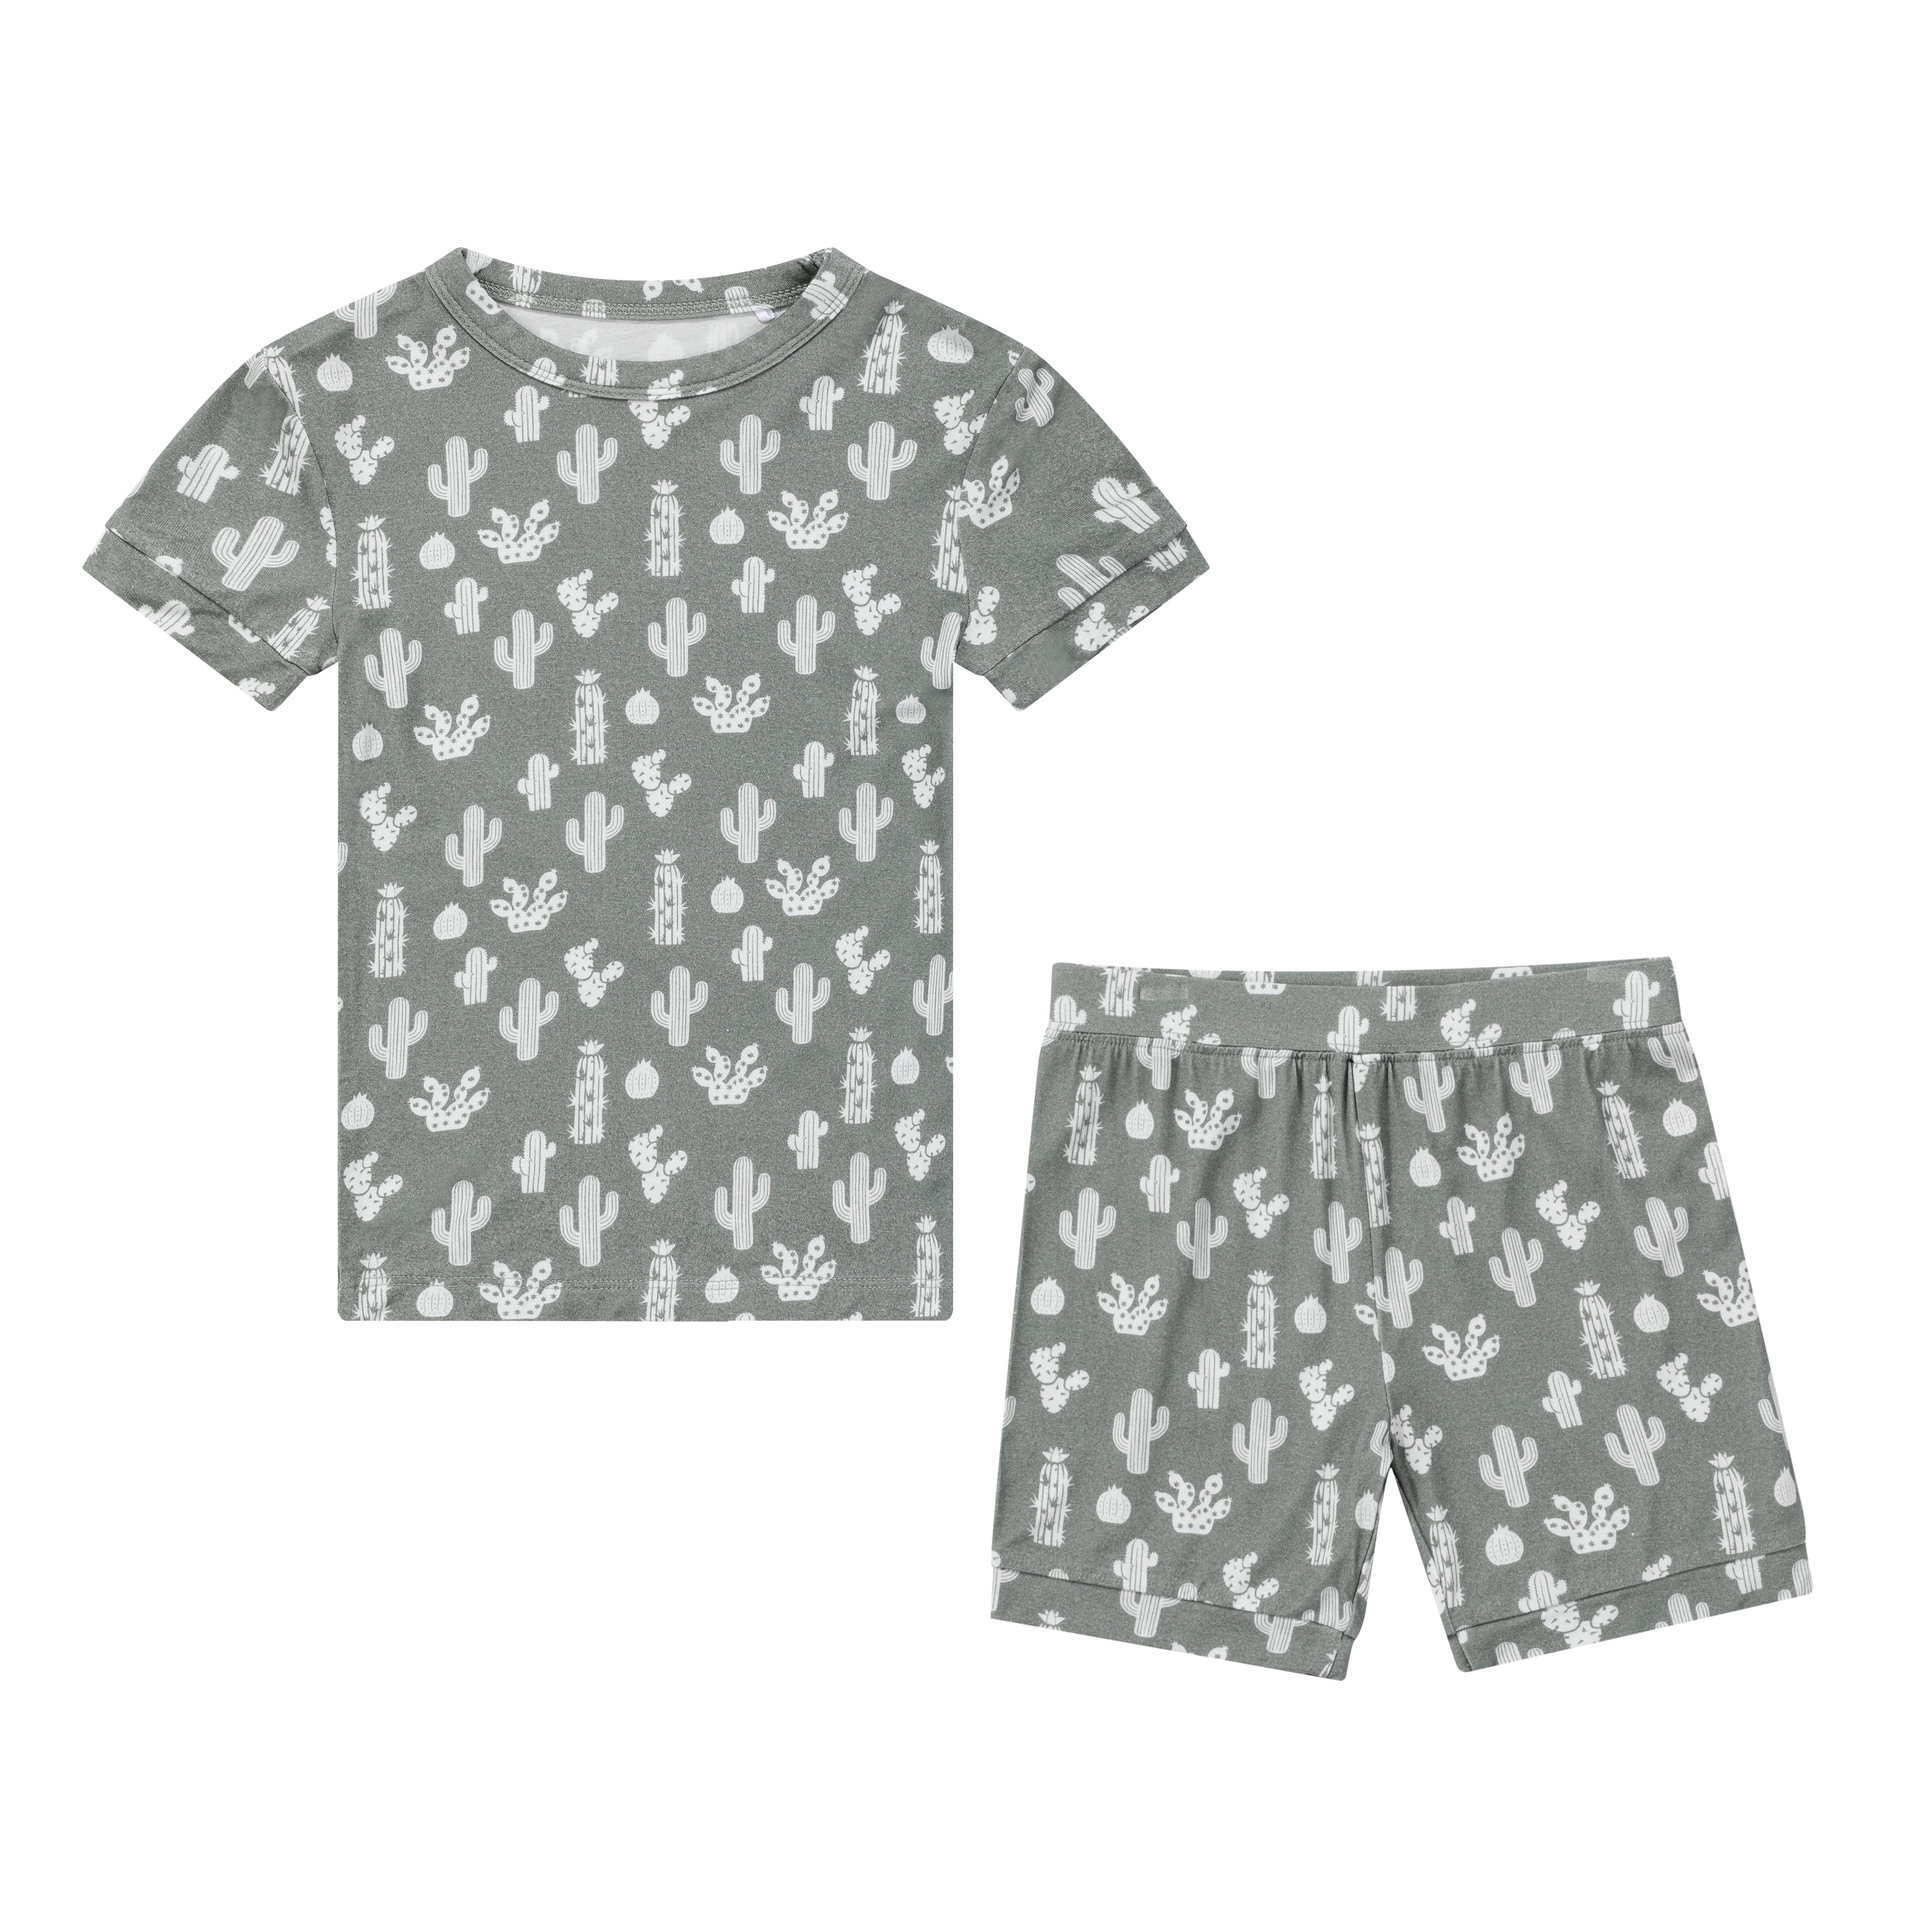 Emerson and Friends - Stay Sharp Bamboo Short Sleeve Kids Pajama Shorts Set: 6-7T